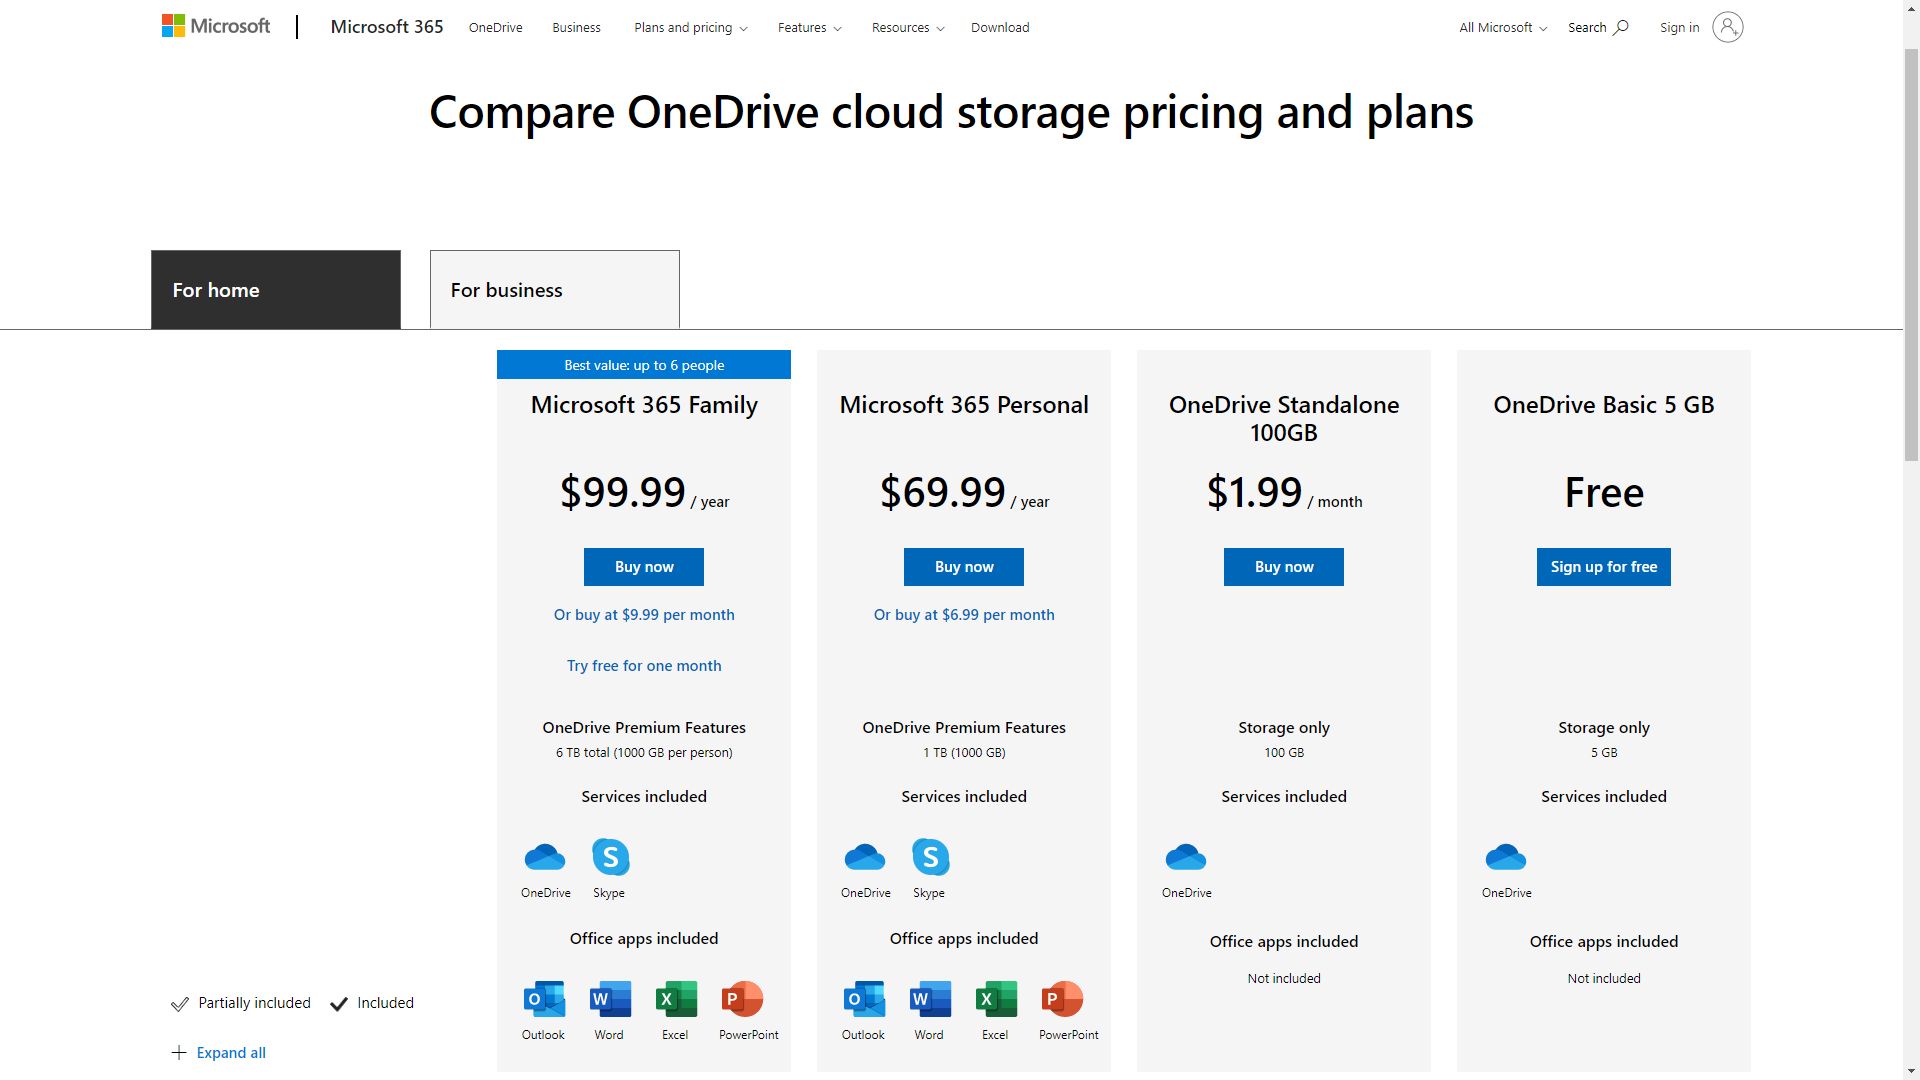 Comparison of OneDrive plans and pricing for home users.